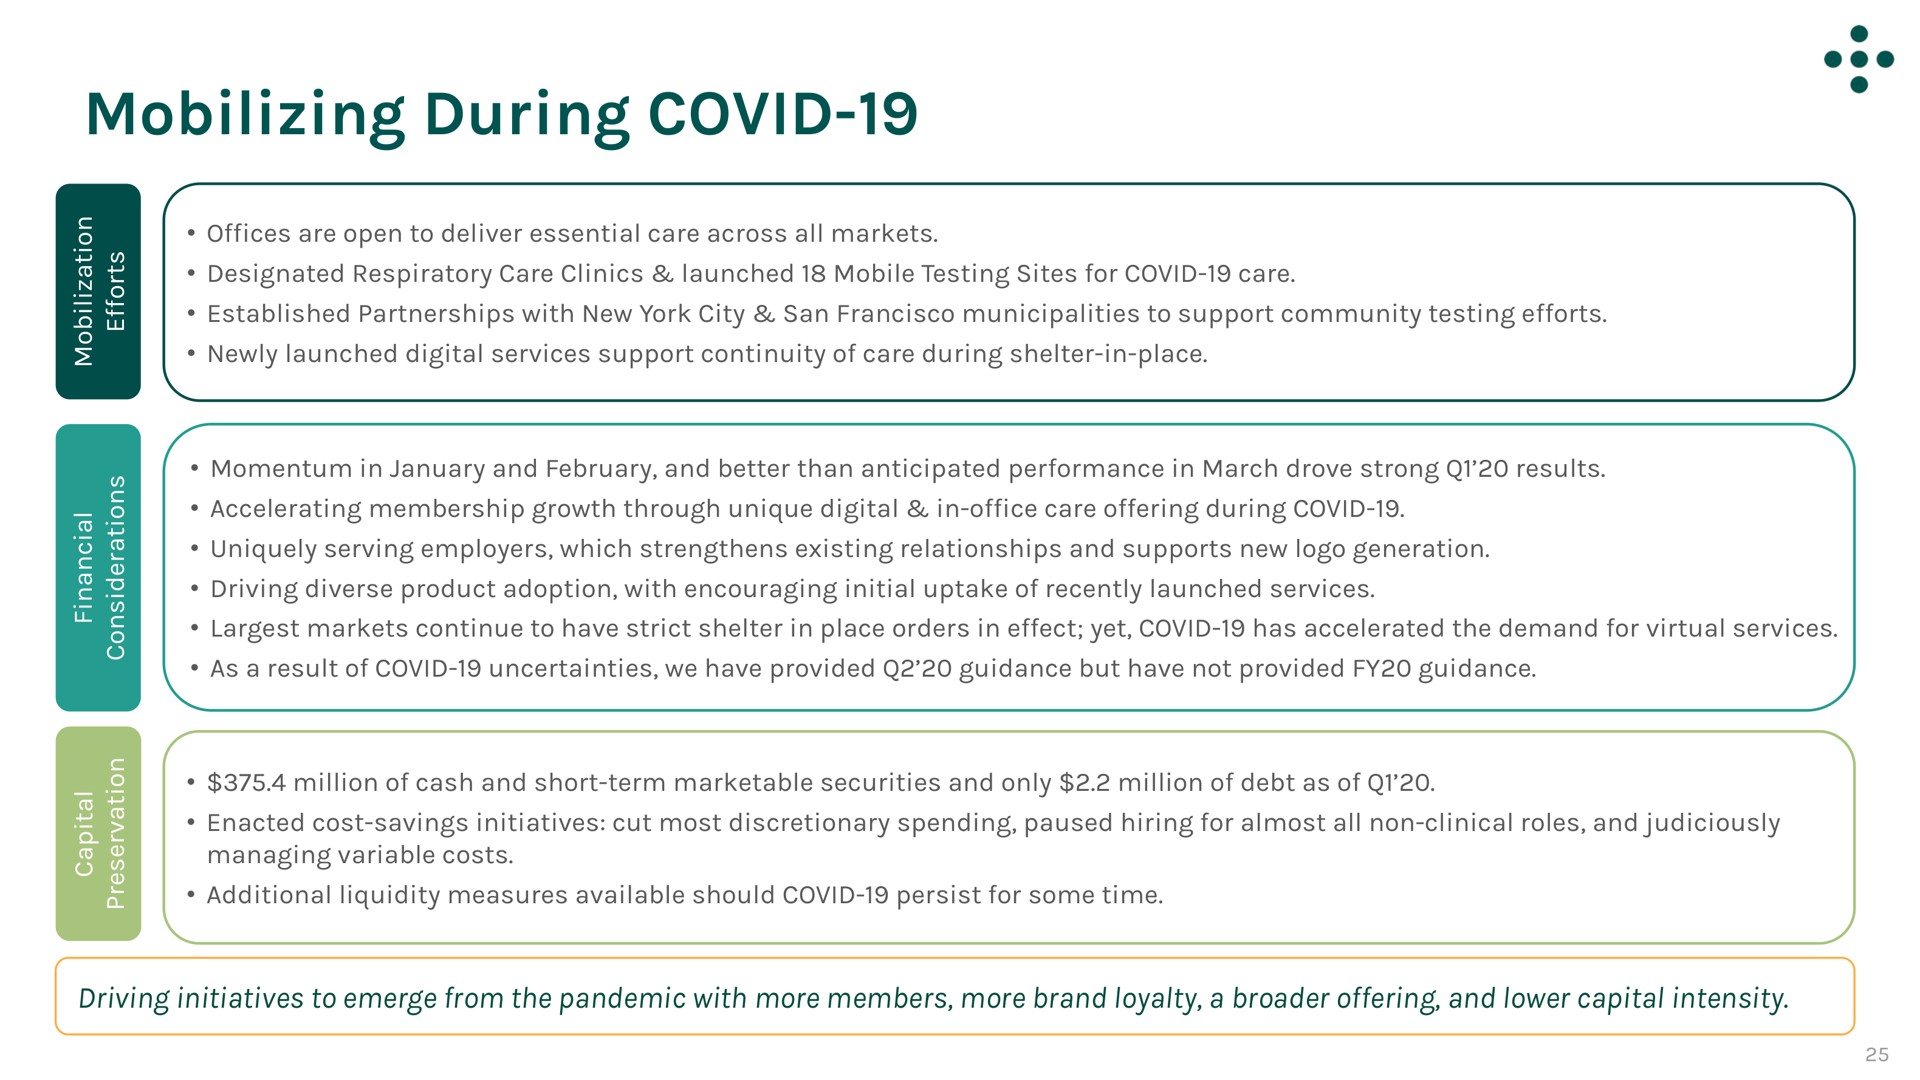 mobilizing during covid | One Medical